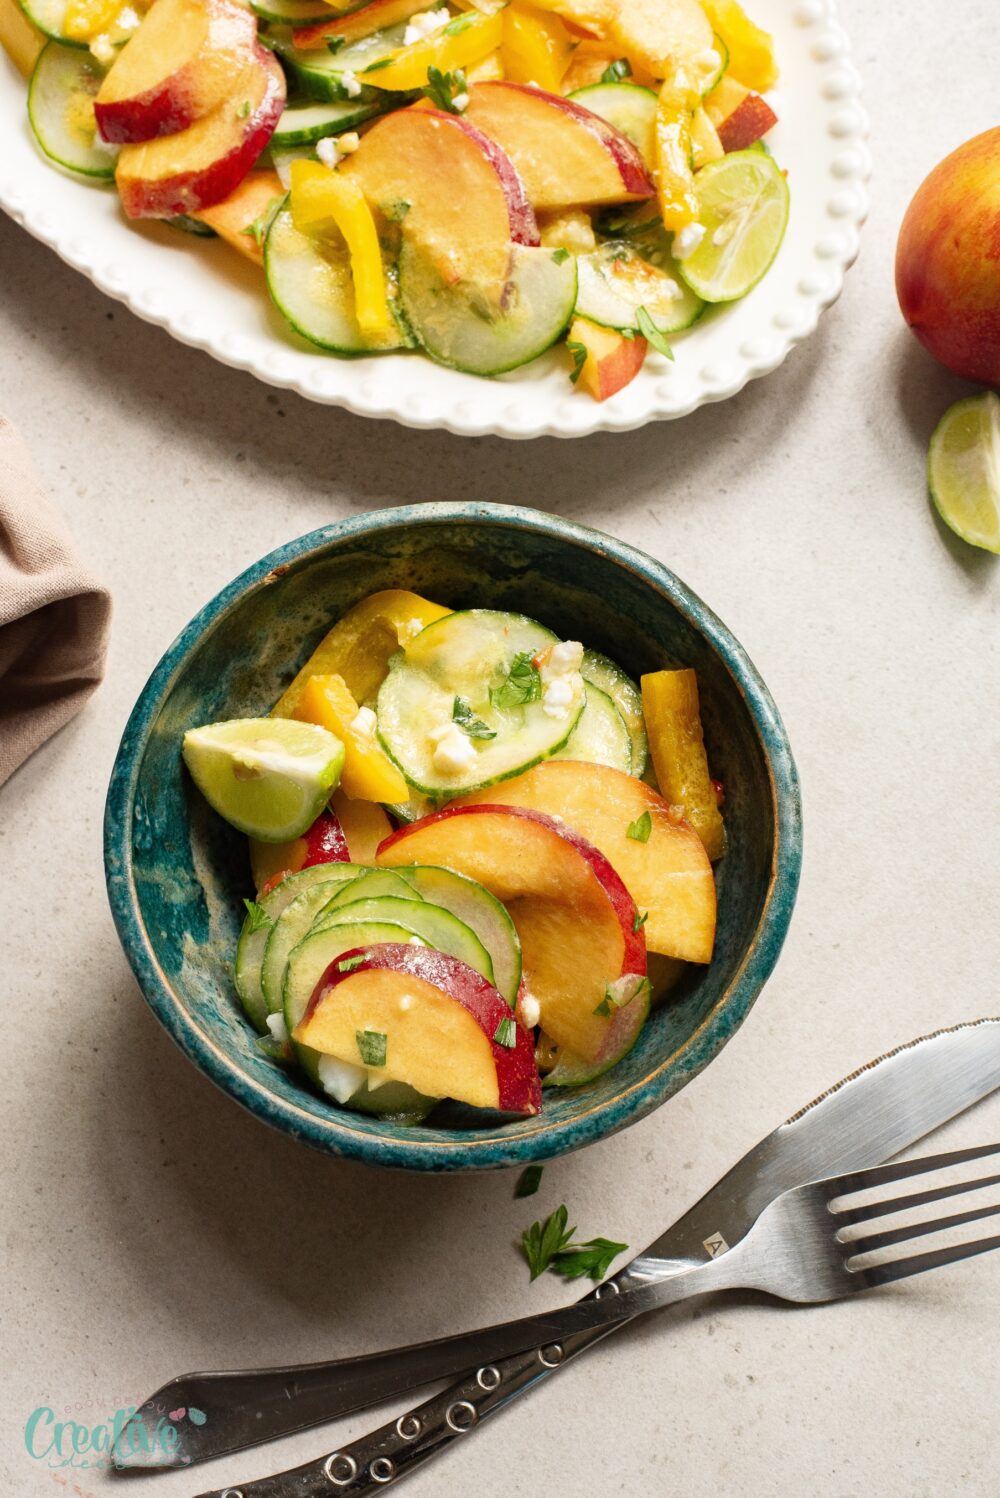 Enjoy a refreshing meal with a plate of nectarine and cucumber salad topped with a delicious dressing.